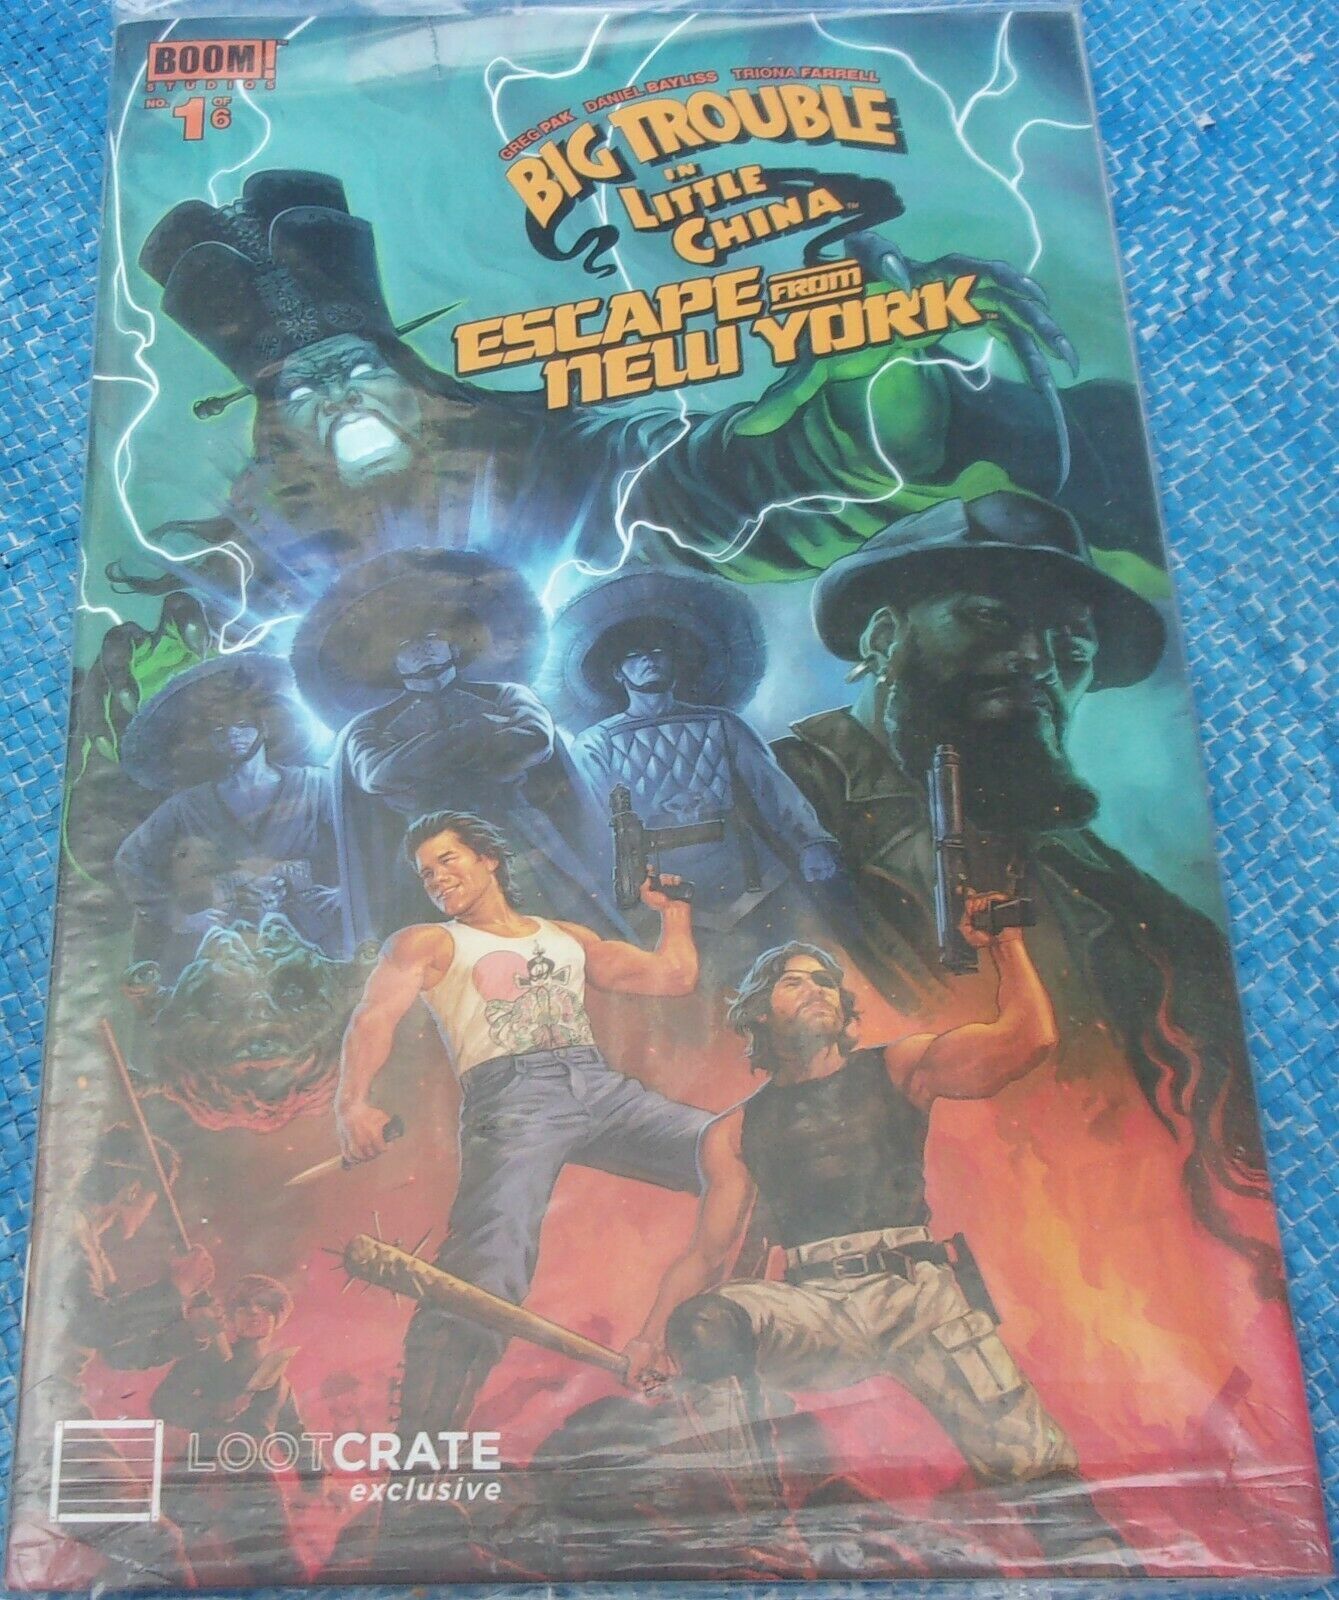 Boom Studios Big Trouble In Little China Escape From New York #1 Sealed Unopened